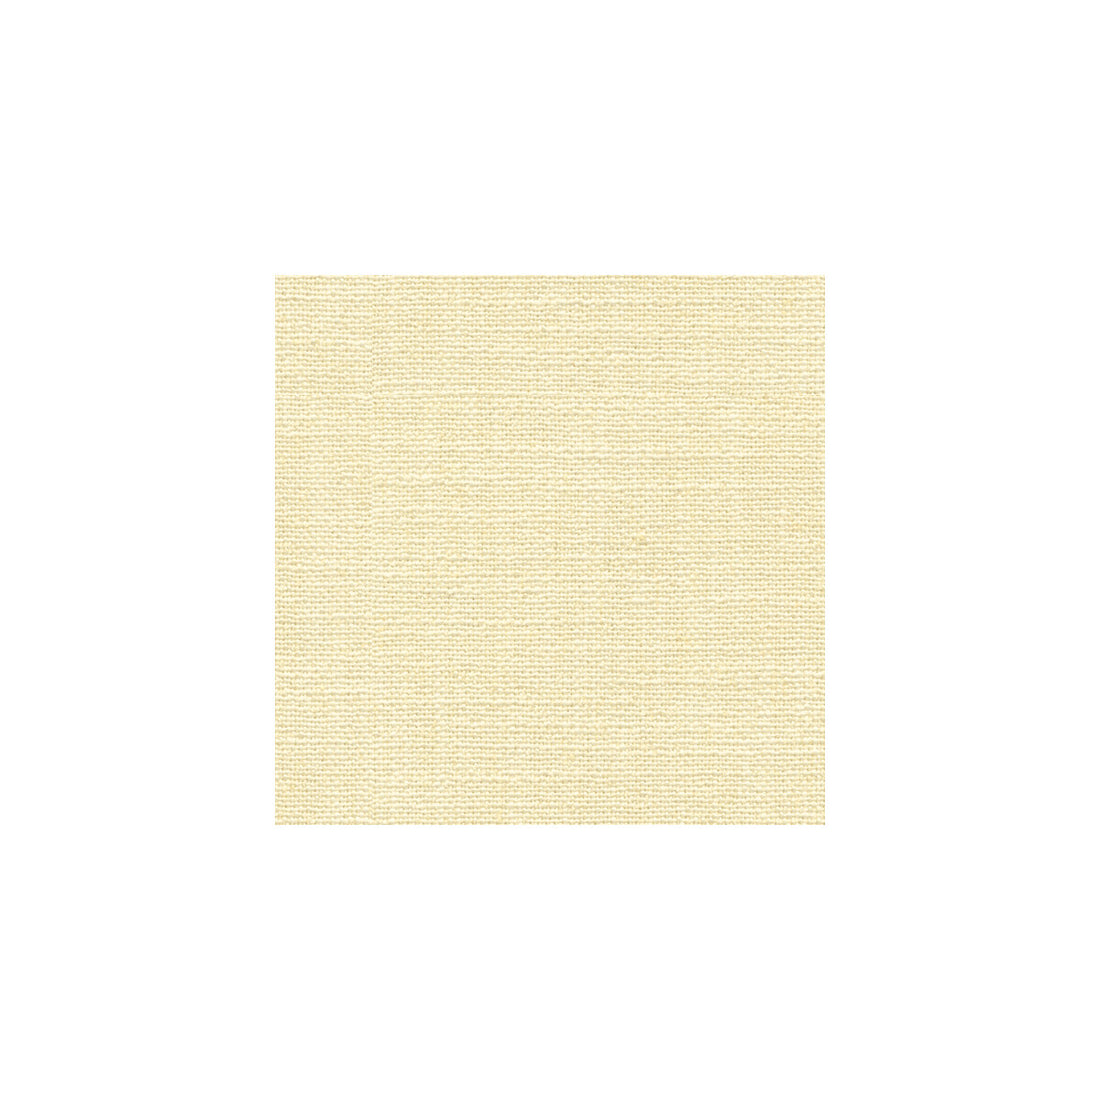 Denman fabric in ivory color - pattern 33008.1.0 - by Kravet Basics in the Sarah Richardson Affinity collection